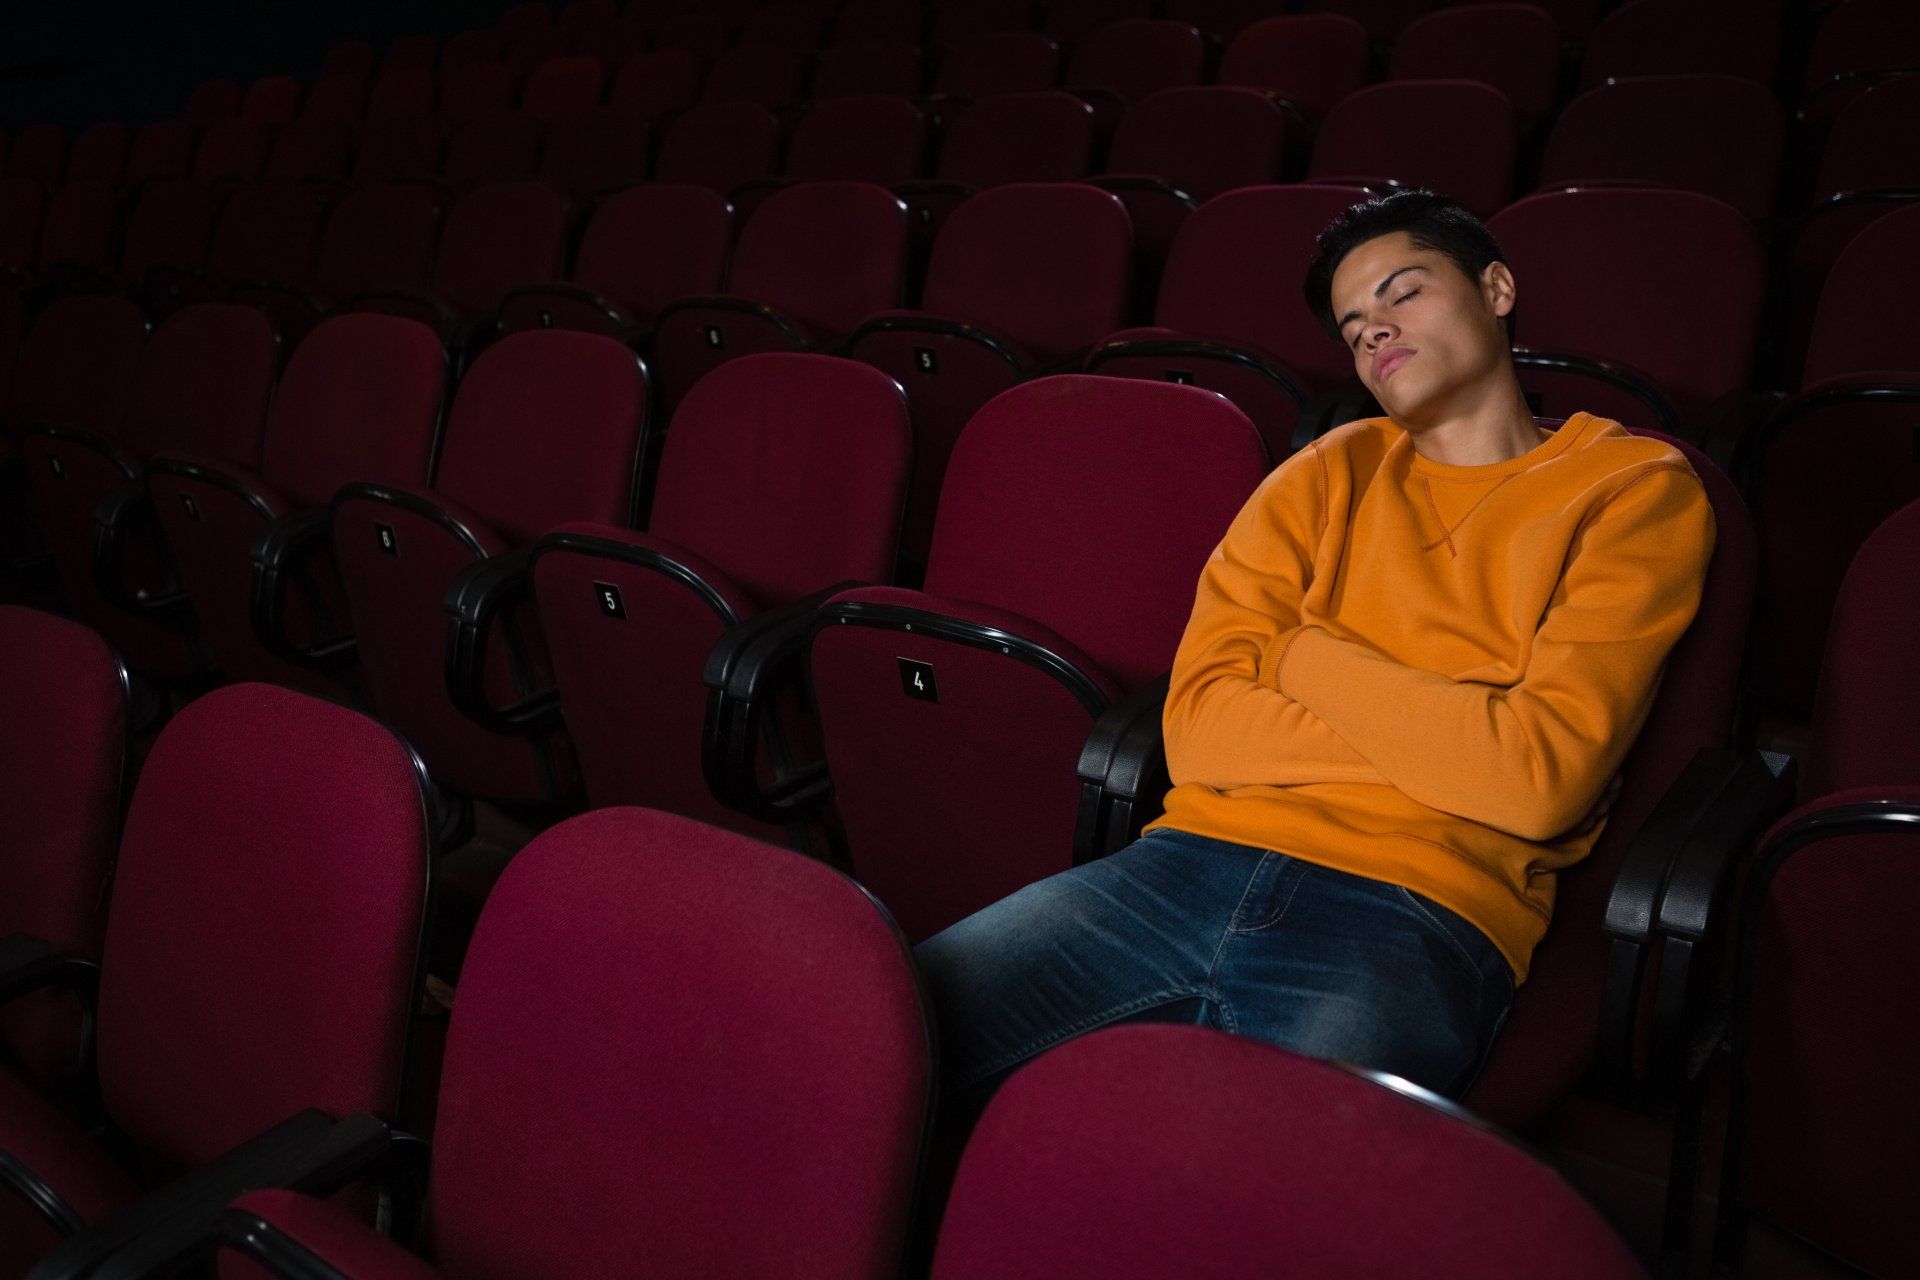 A photograph of a man, sat alone in a cinema auditorium, asleep on his seat